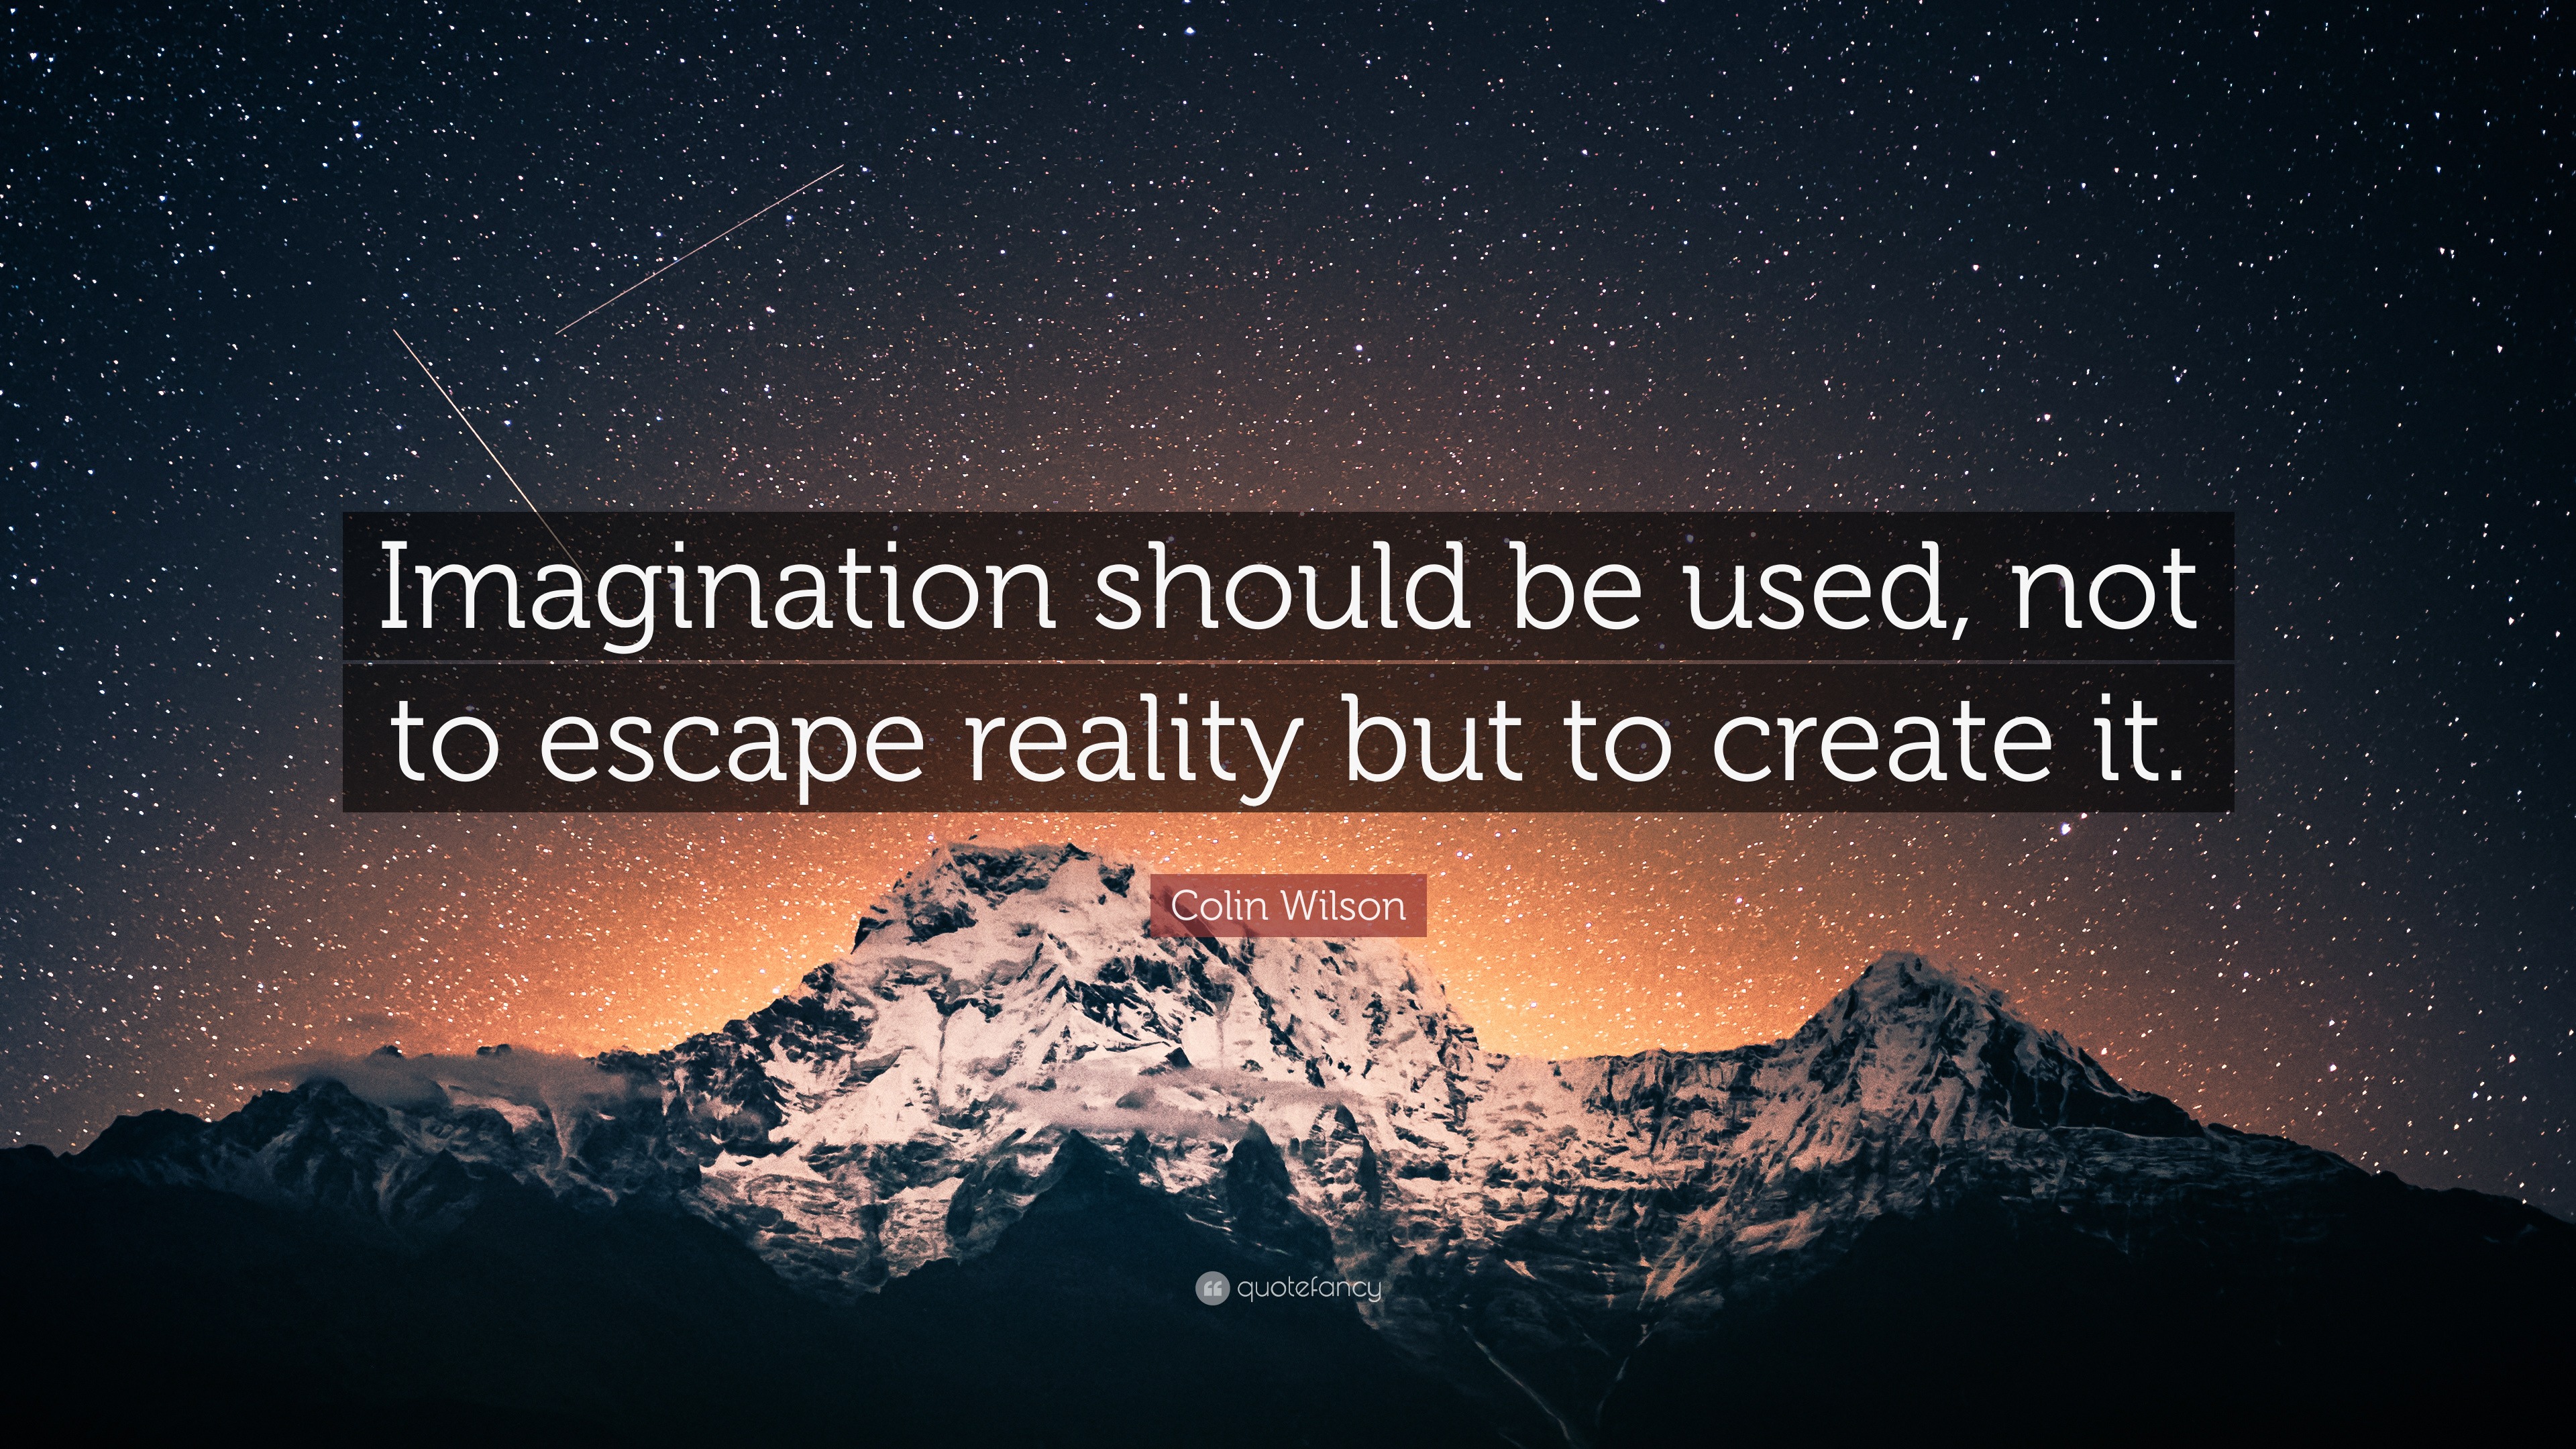 Colin Wilson Quote: “Imagination should be used, not to escape reality ...